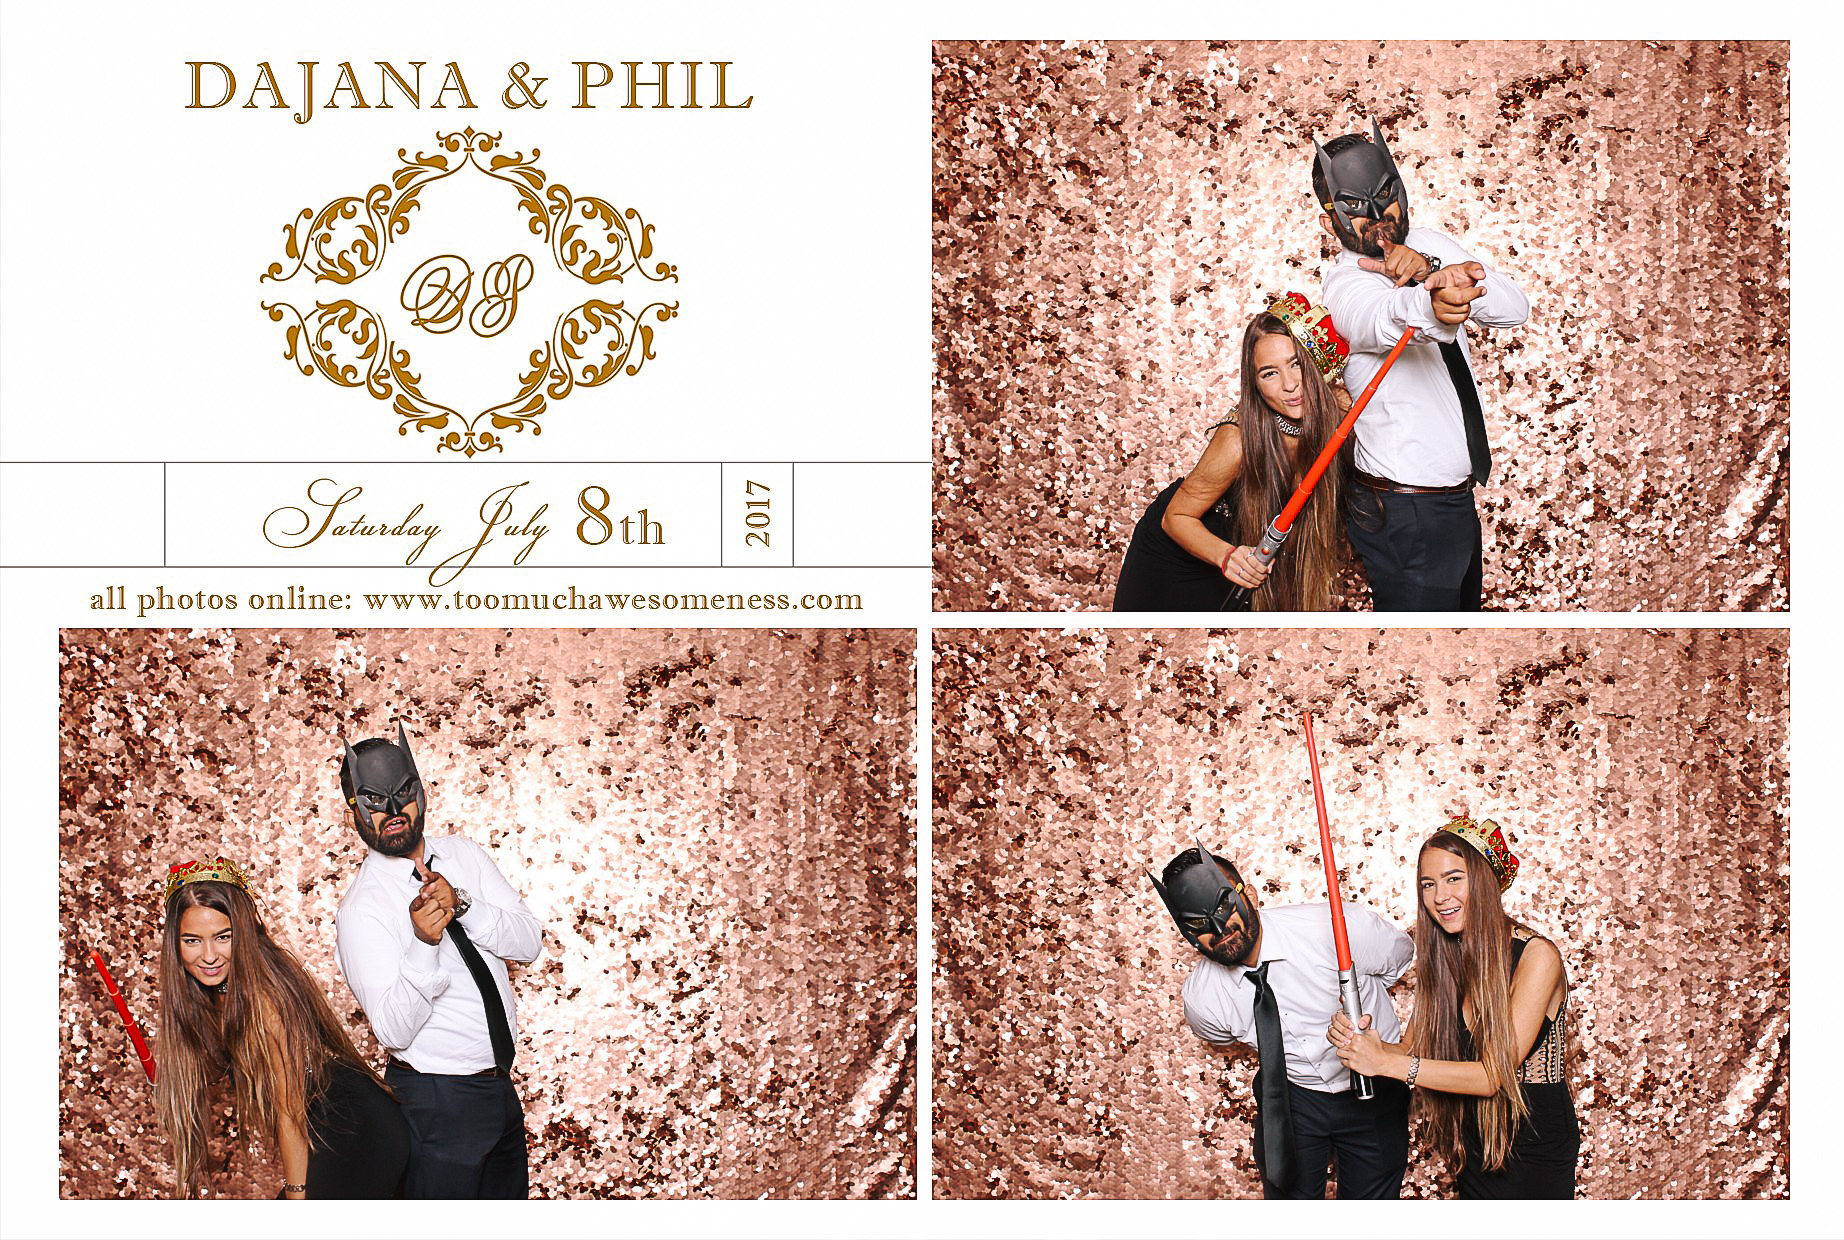 00084 Dajana and Phil Taylor Wedding Photos photobooth by too much awesomeness.jpg